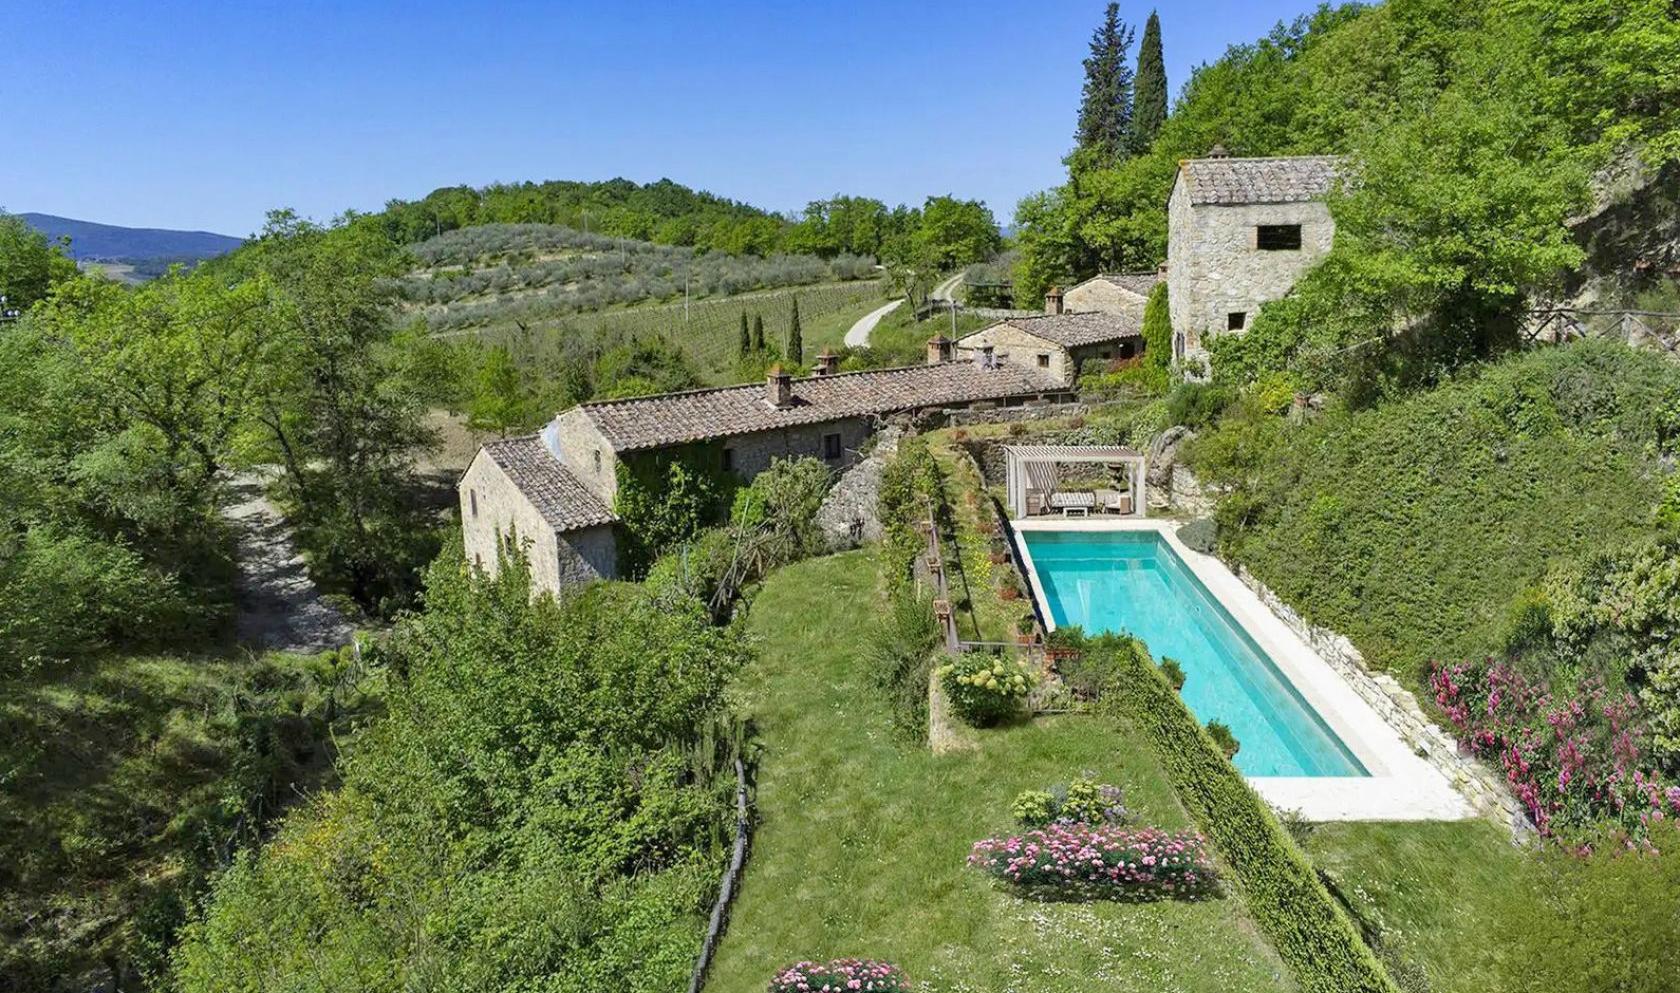 Toscana Immobiliare - Restored farmhouse with 2 annexes, 11 bedrooms, 10 bathrooms, swimming pool and 7.8 ha of land in Tuscany